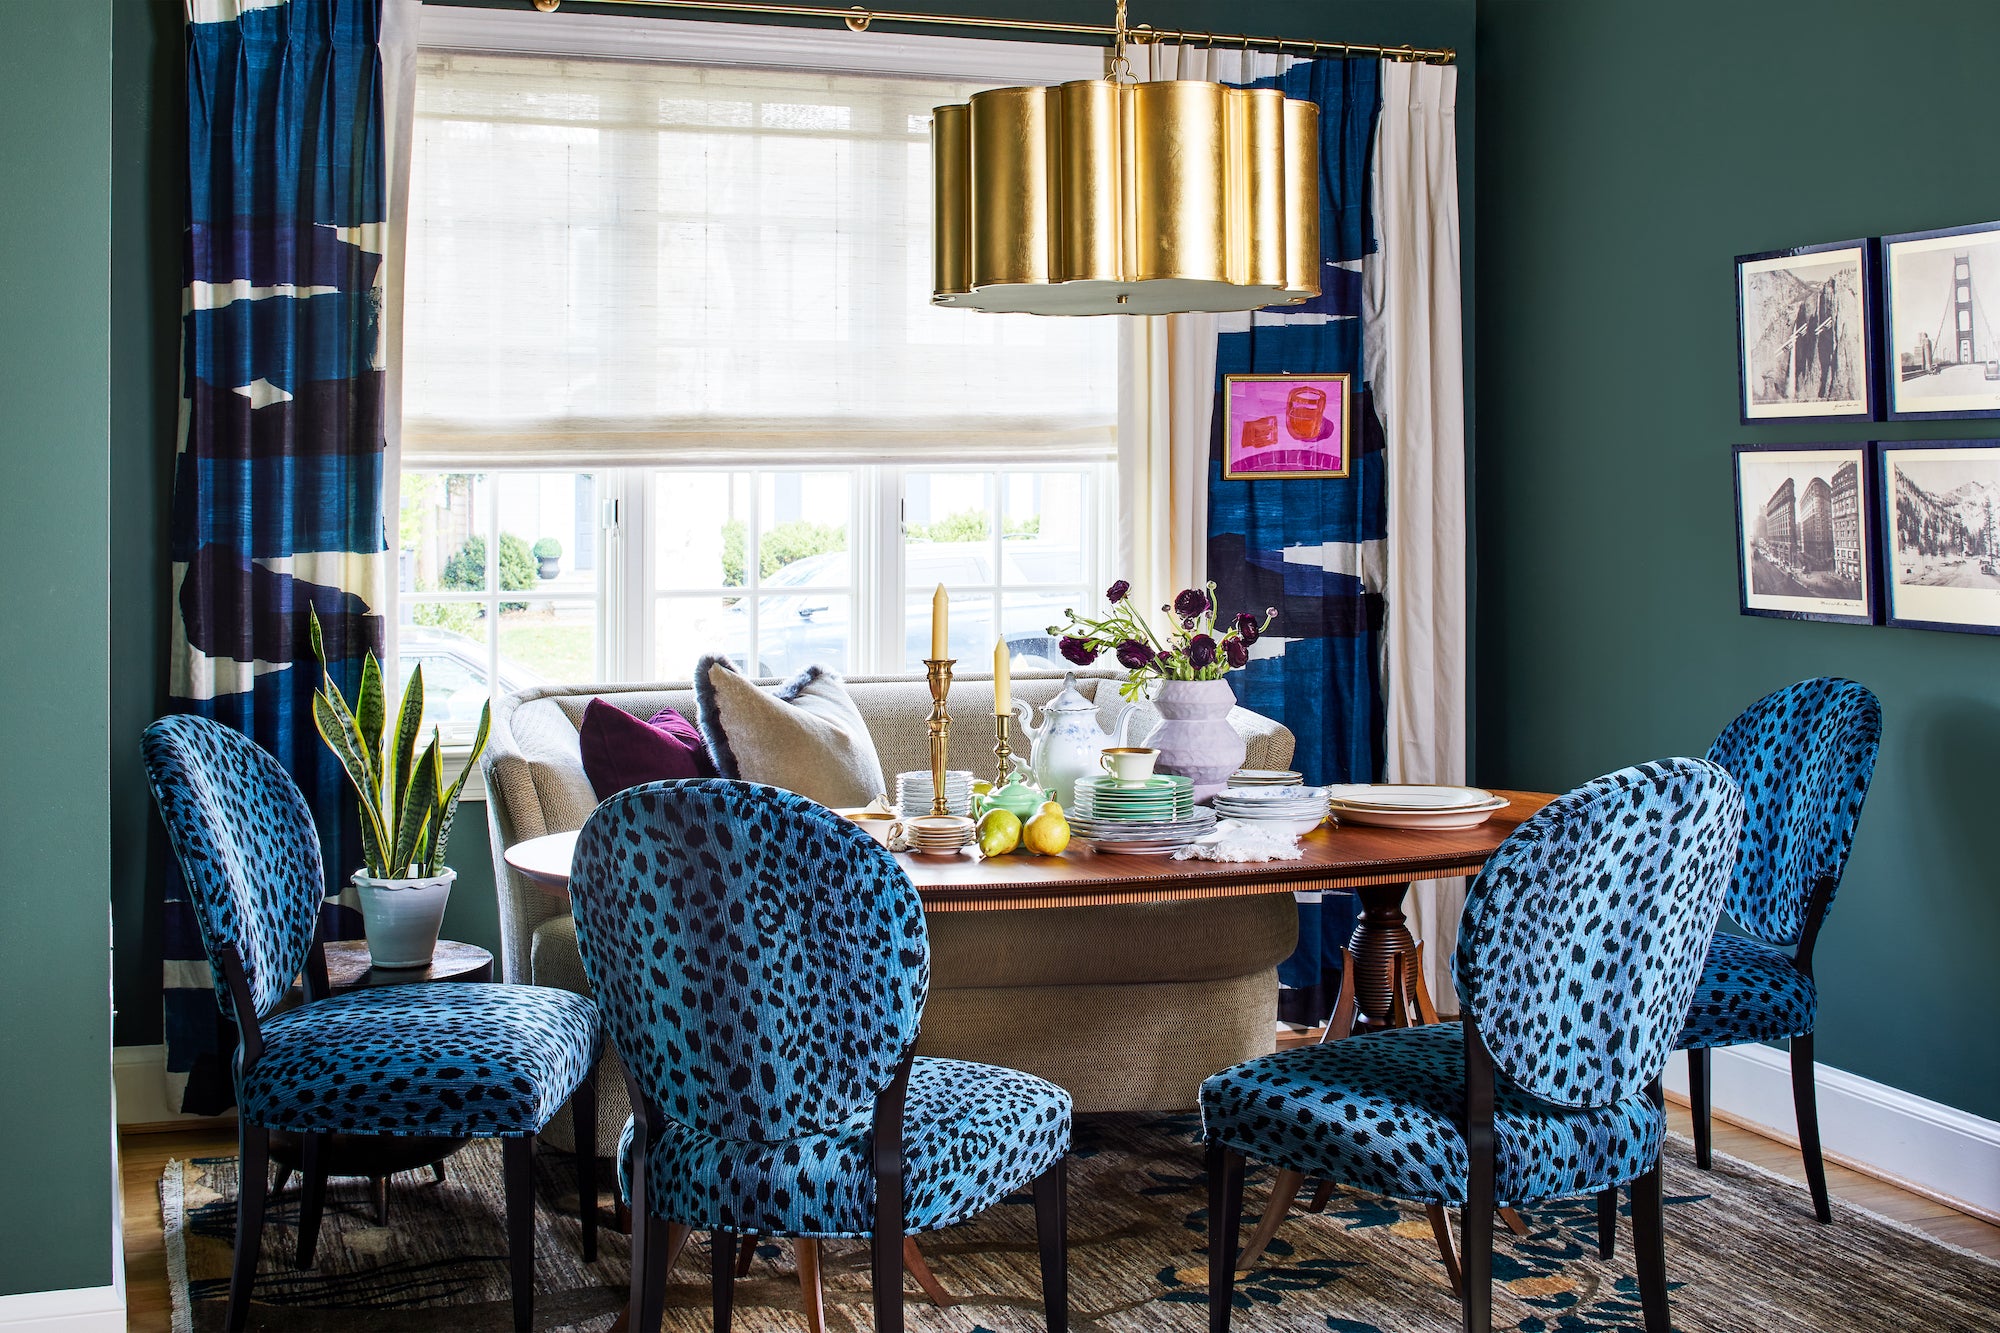 A jewel toned dining nook with an upholstered banquette and animal print chairs by Lisa & Leroy.